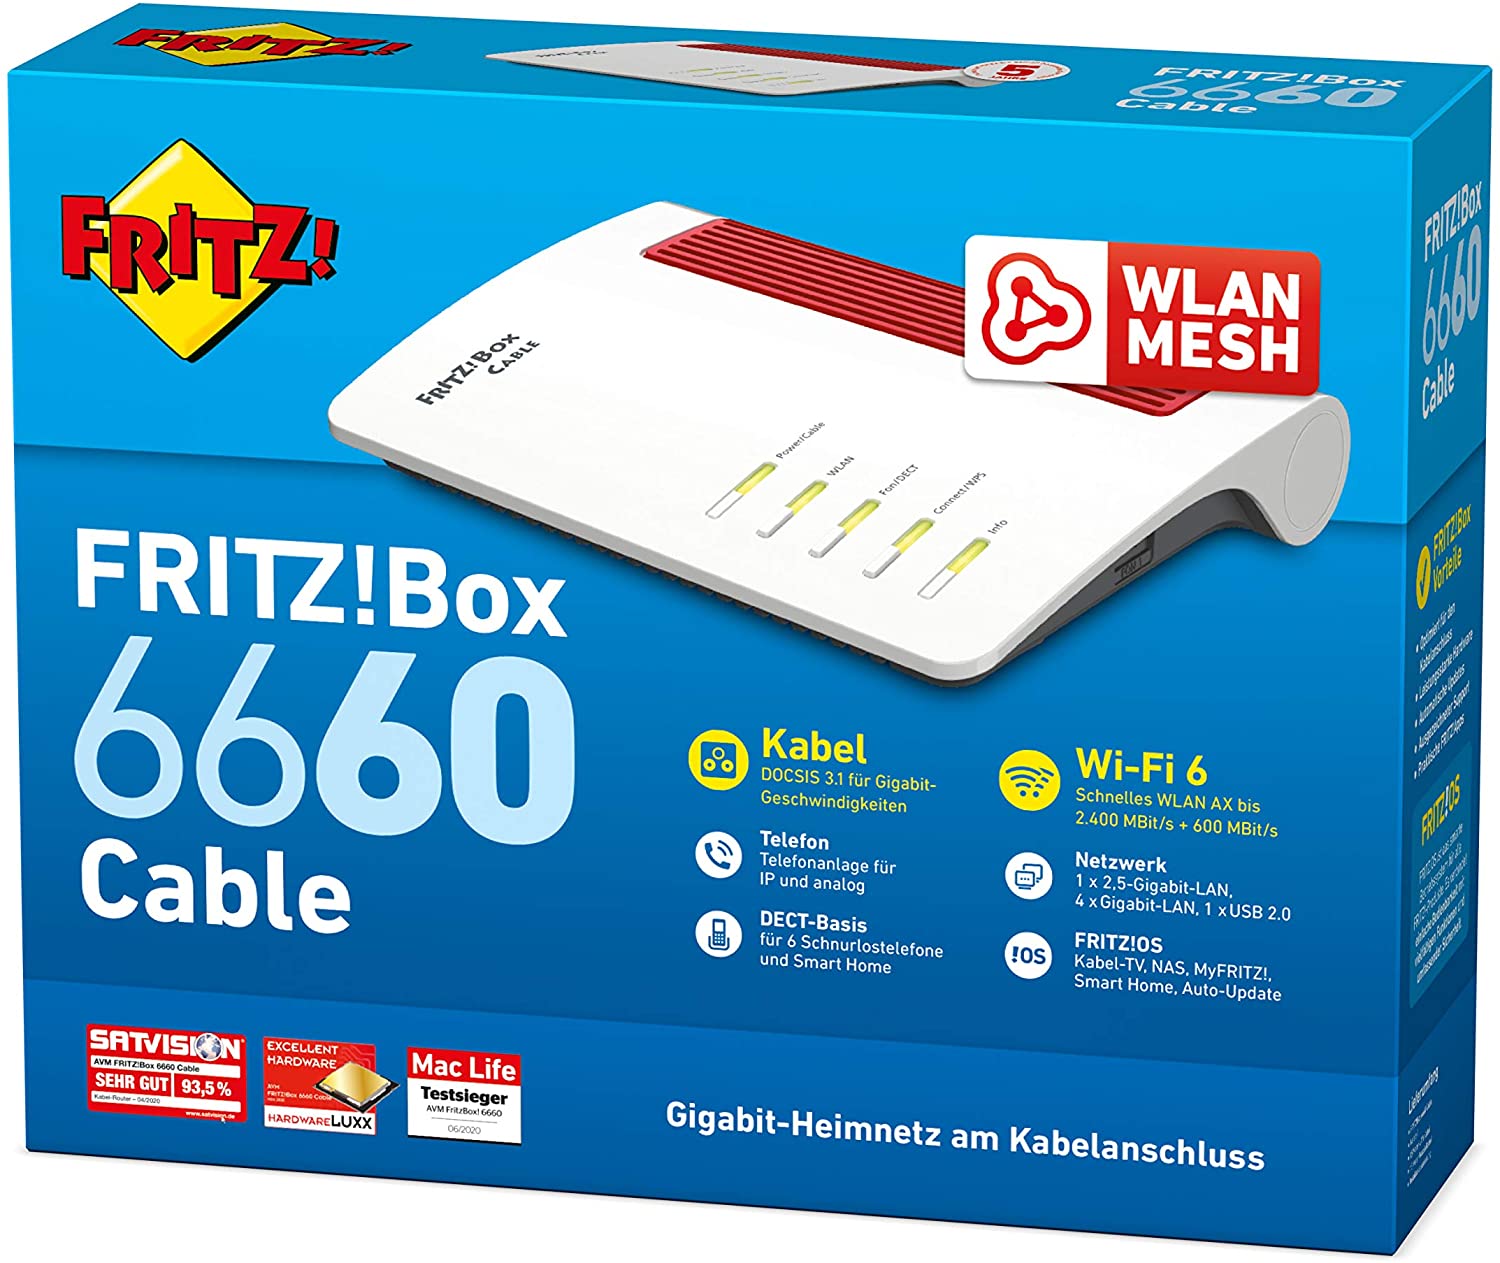 FRITZ!Box 6660 Cable